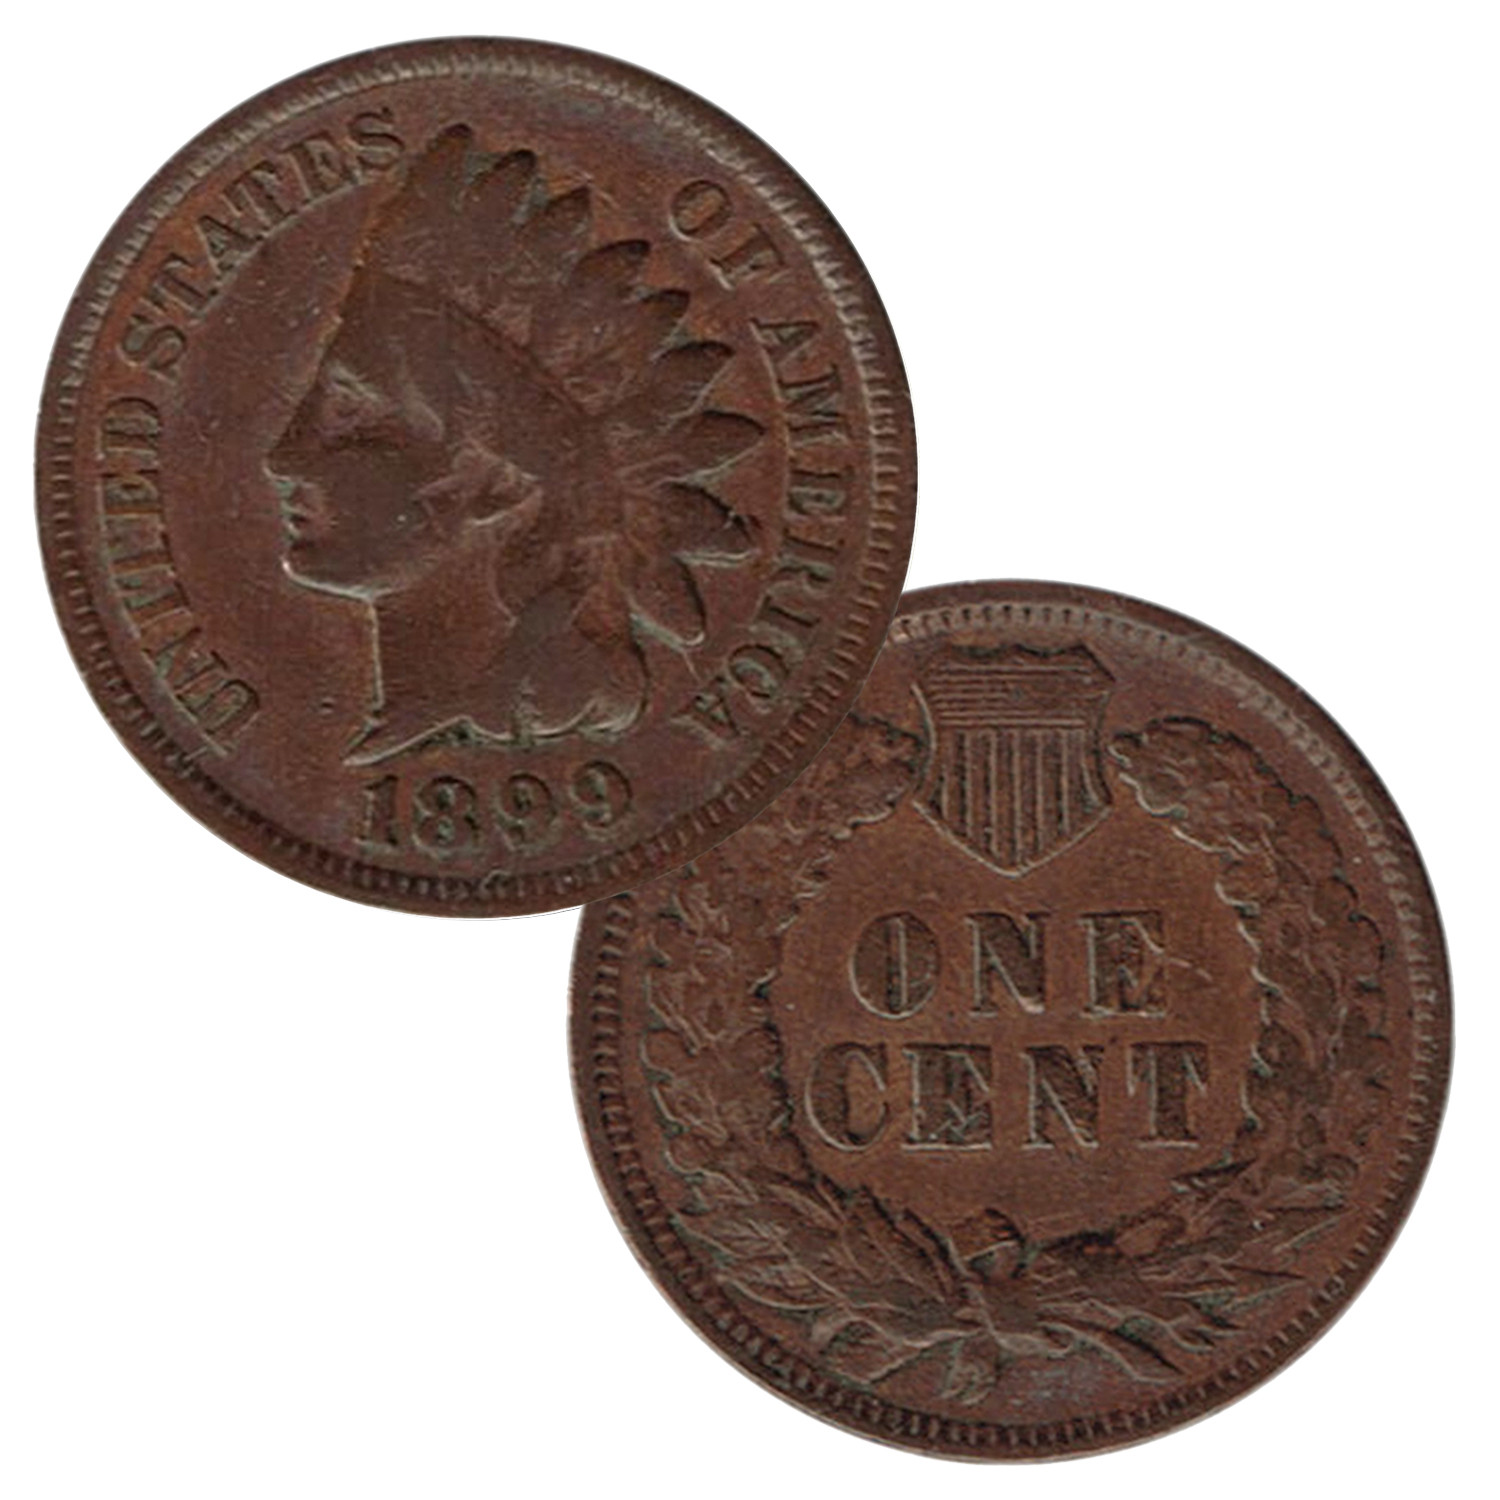 Cull Indian Head Cents - All coins will be minted between 1859-1909.